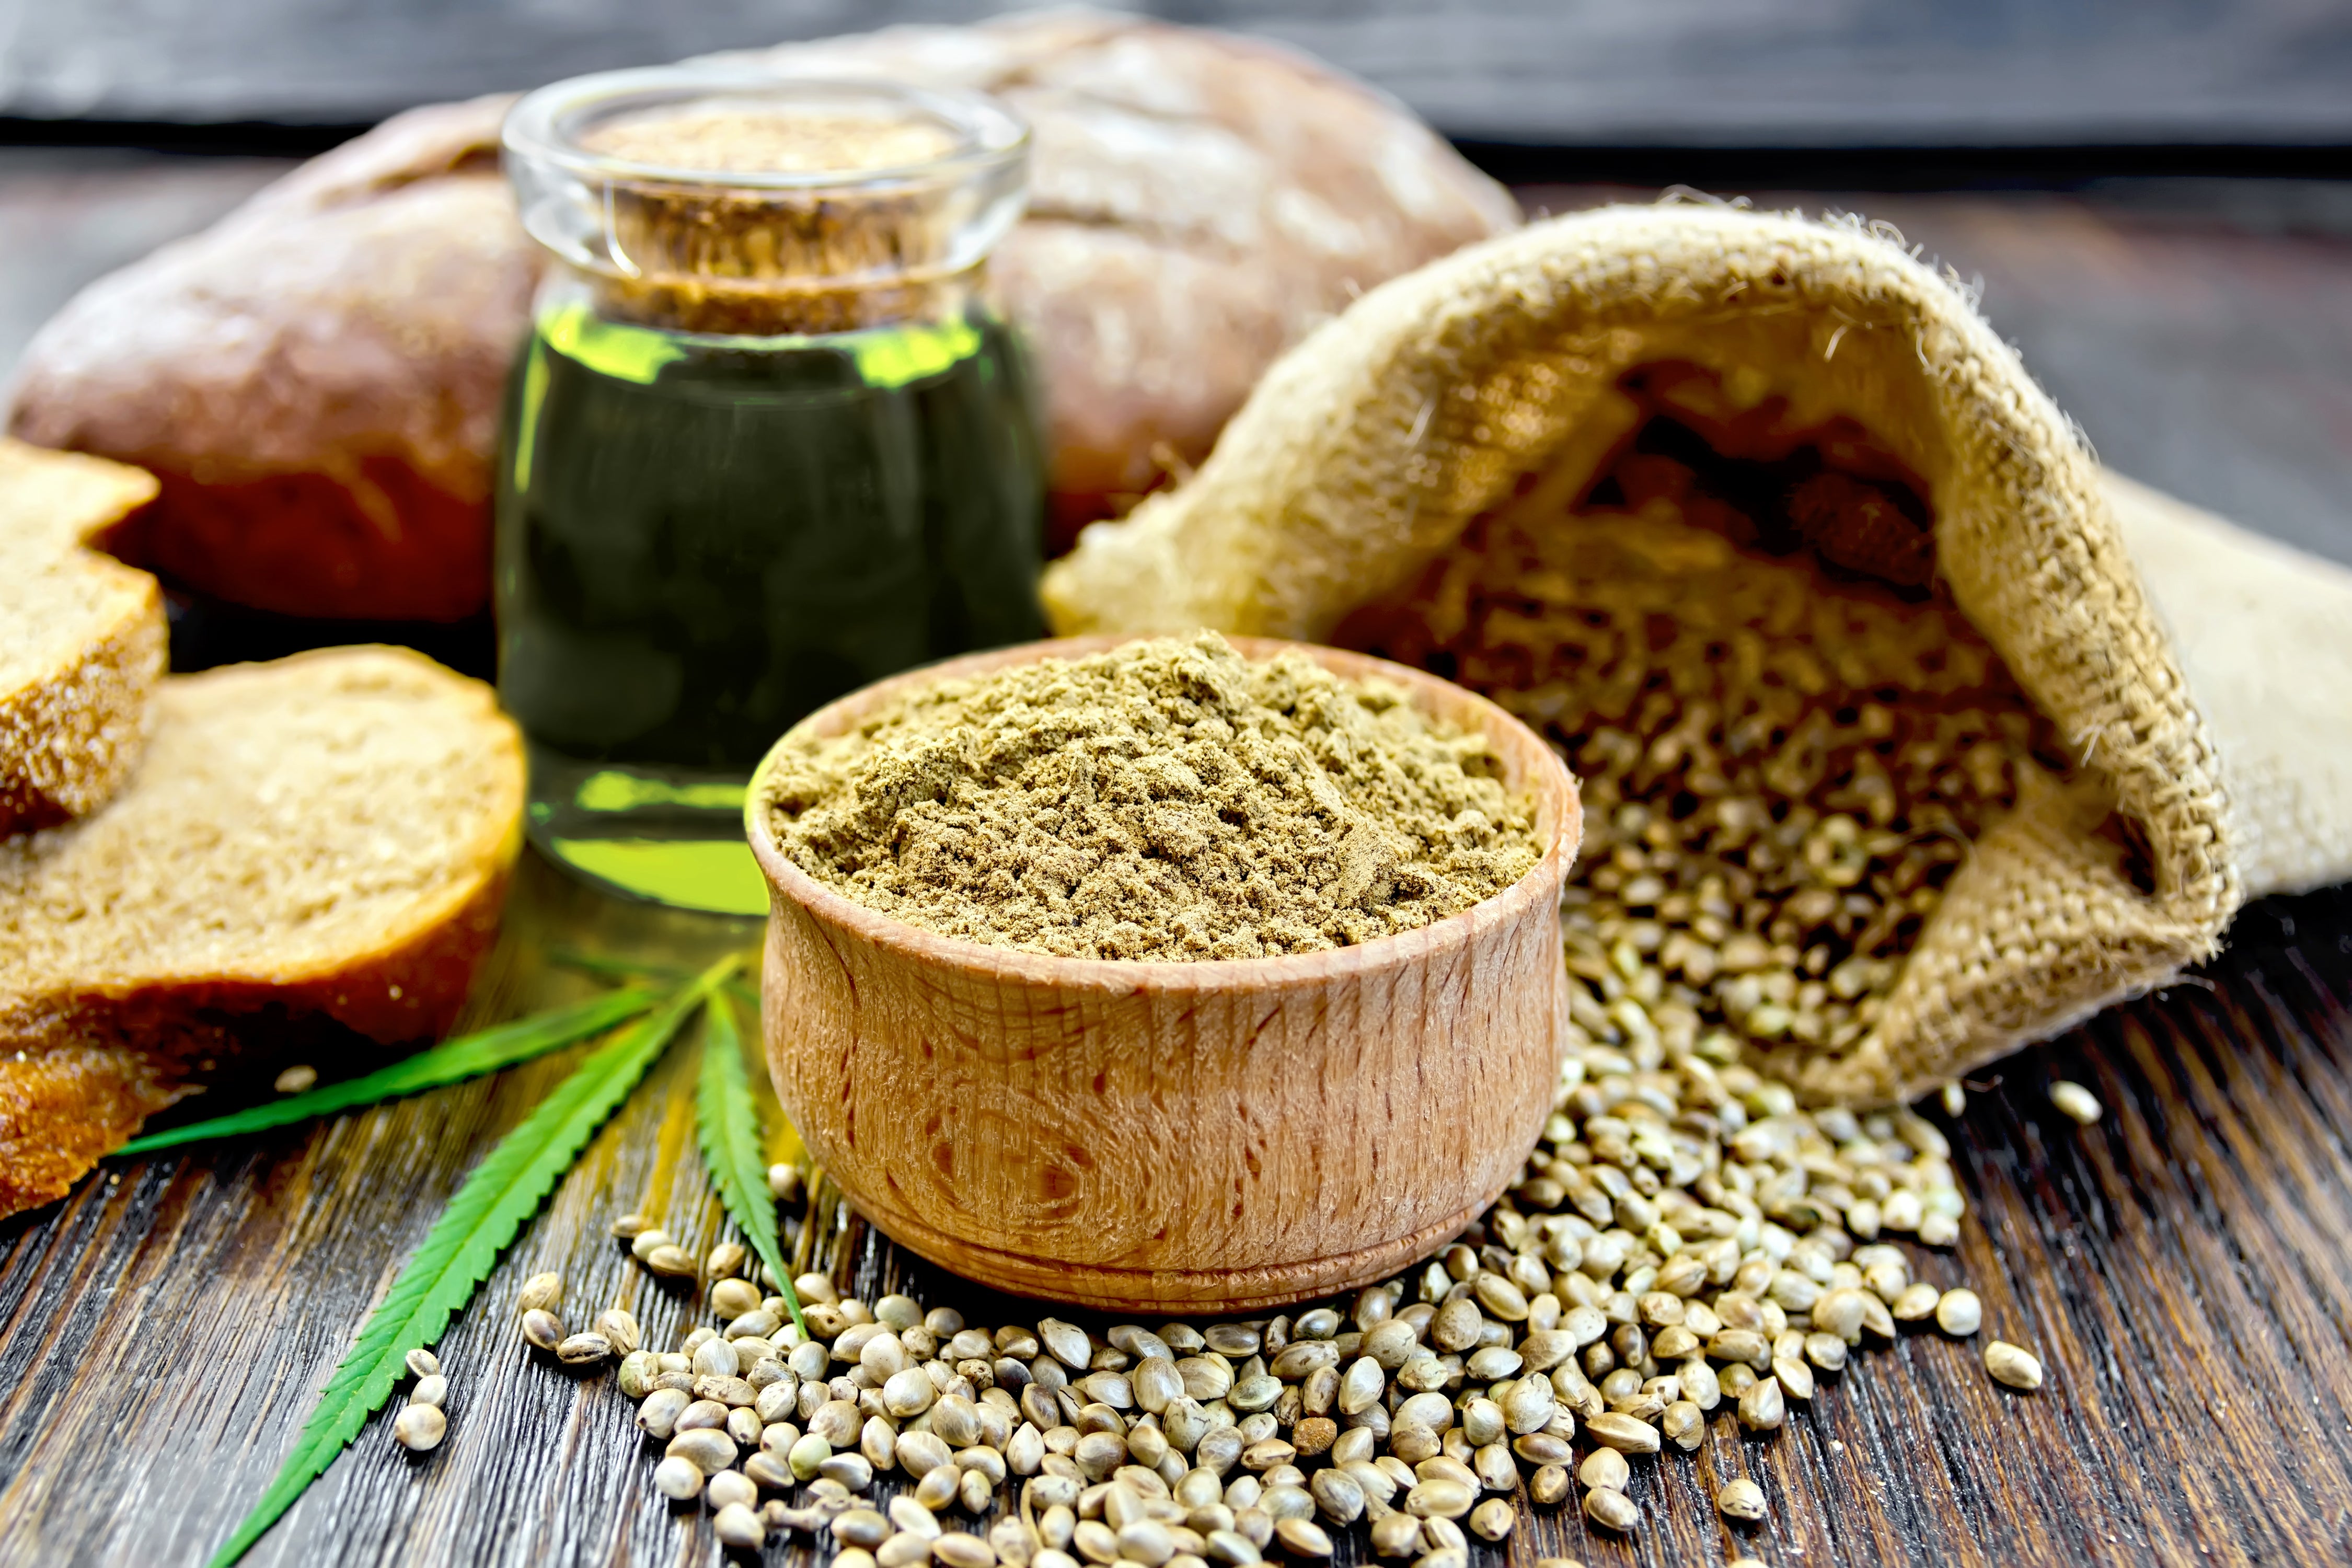 25 Amazing Uses And Benefits Of Hemp Seed Oil